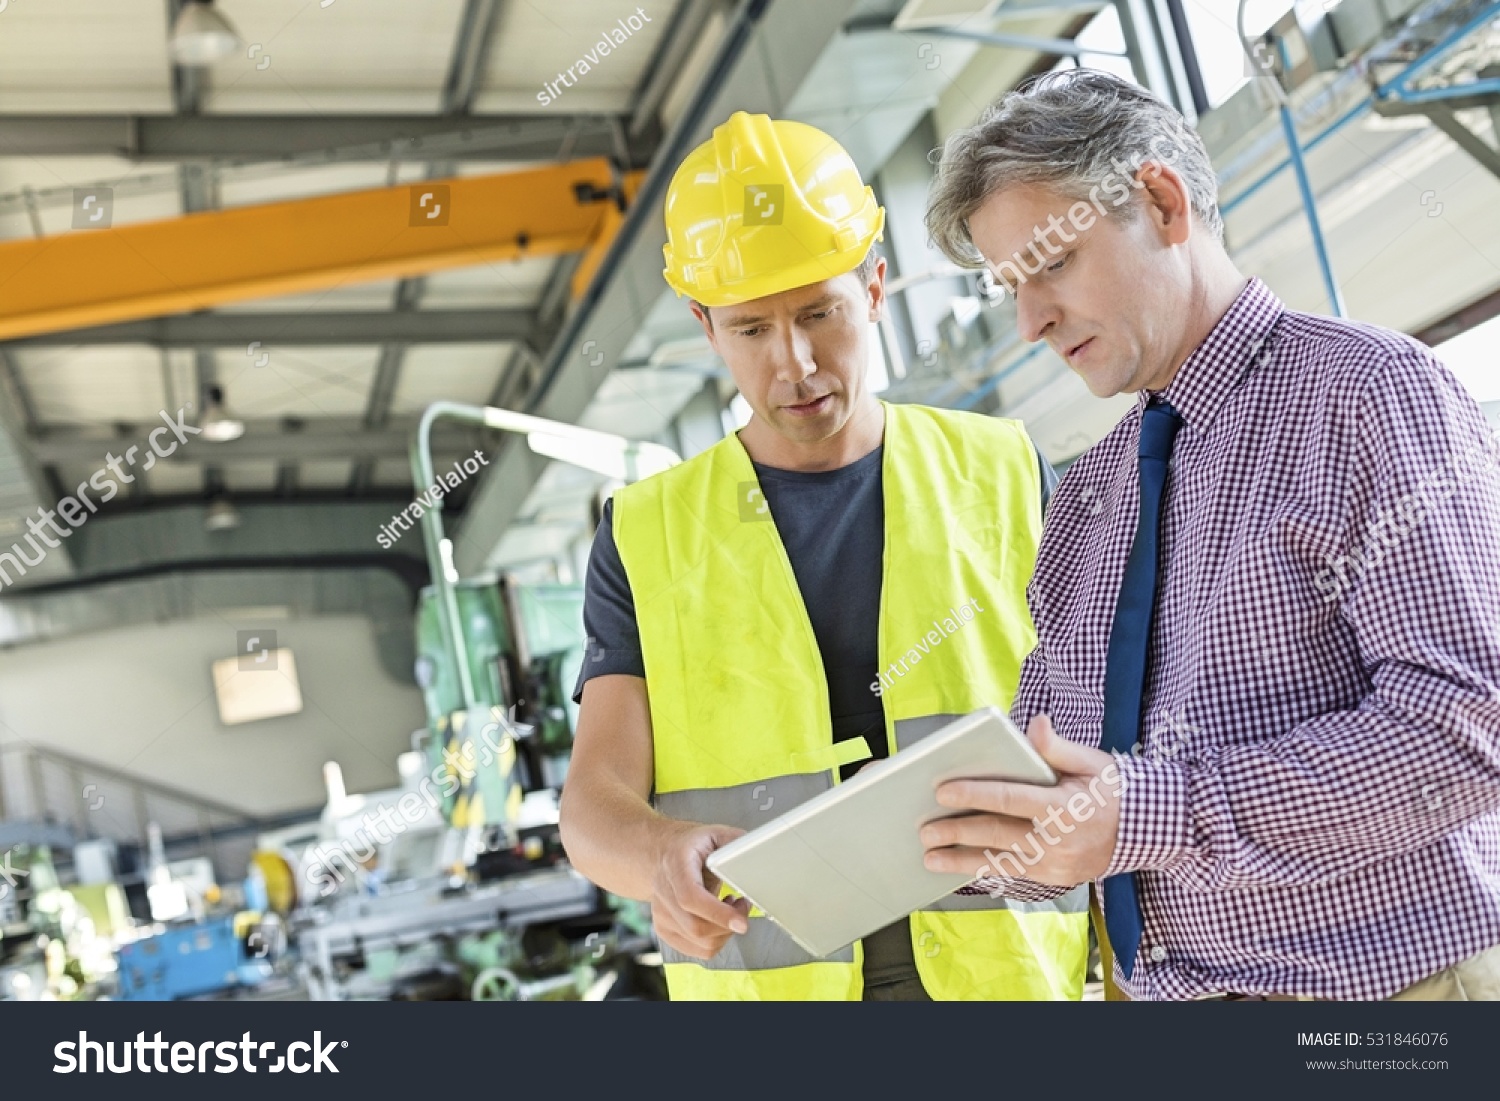 Supervisor and manual worker using digital tablet in metal industry #531846076